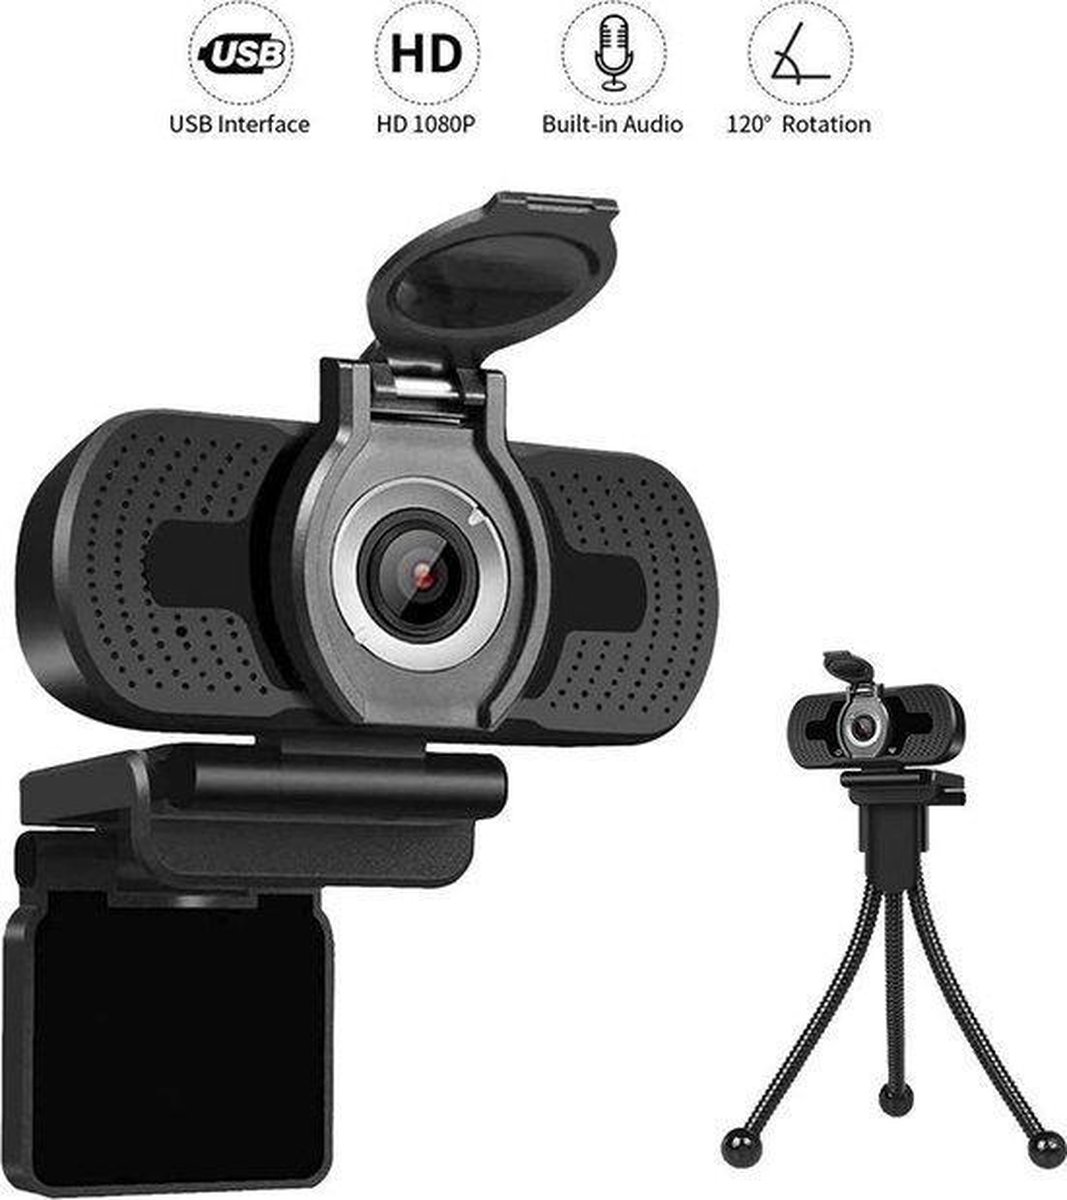 Takmach Webcam Full HD 1080P - GRATIS Privacy Cover & Tripod - Werk & Thuis - Plug & Play - Windows Mac & Android